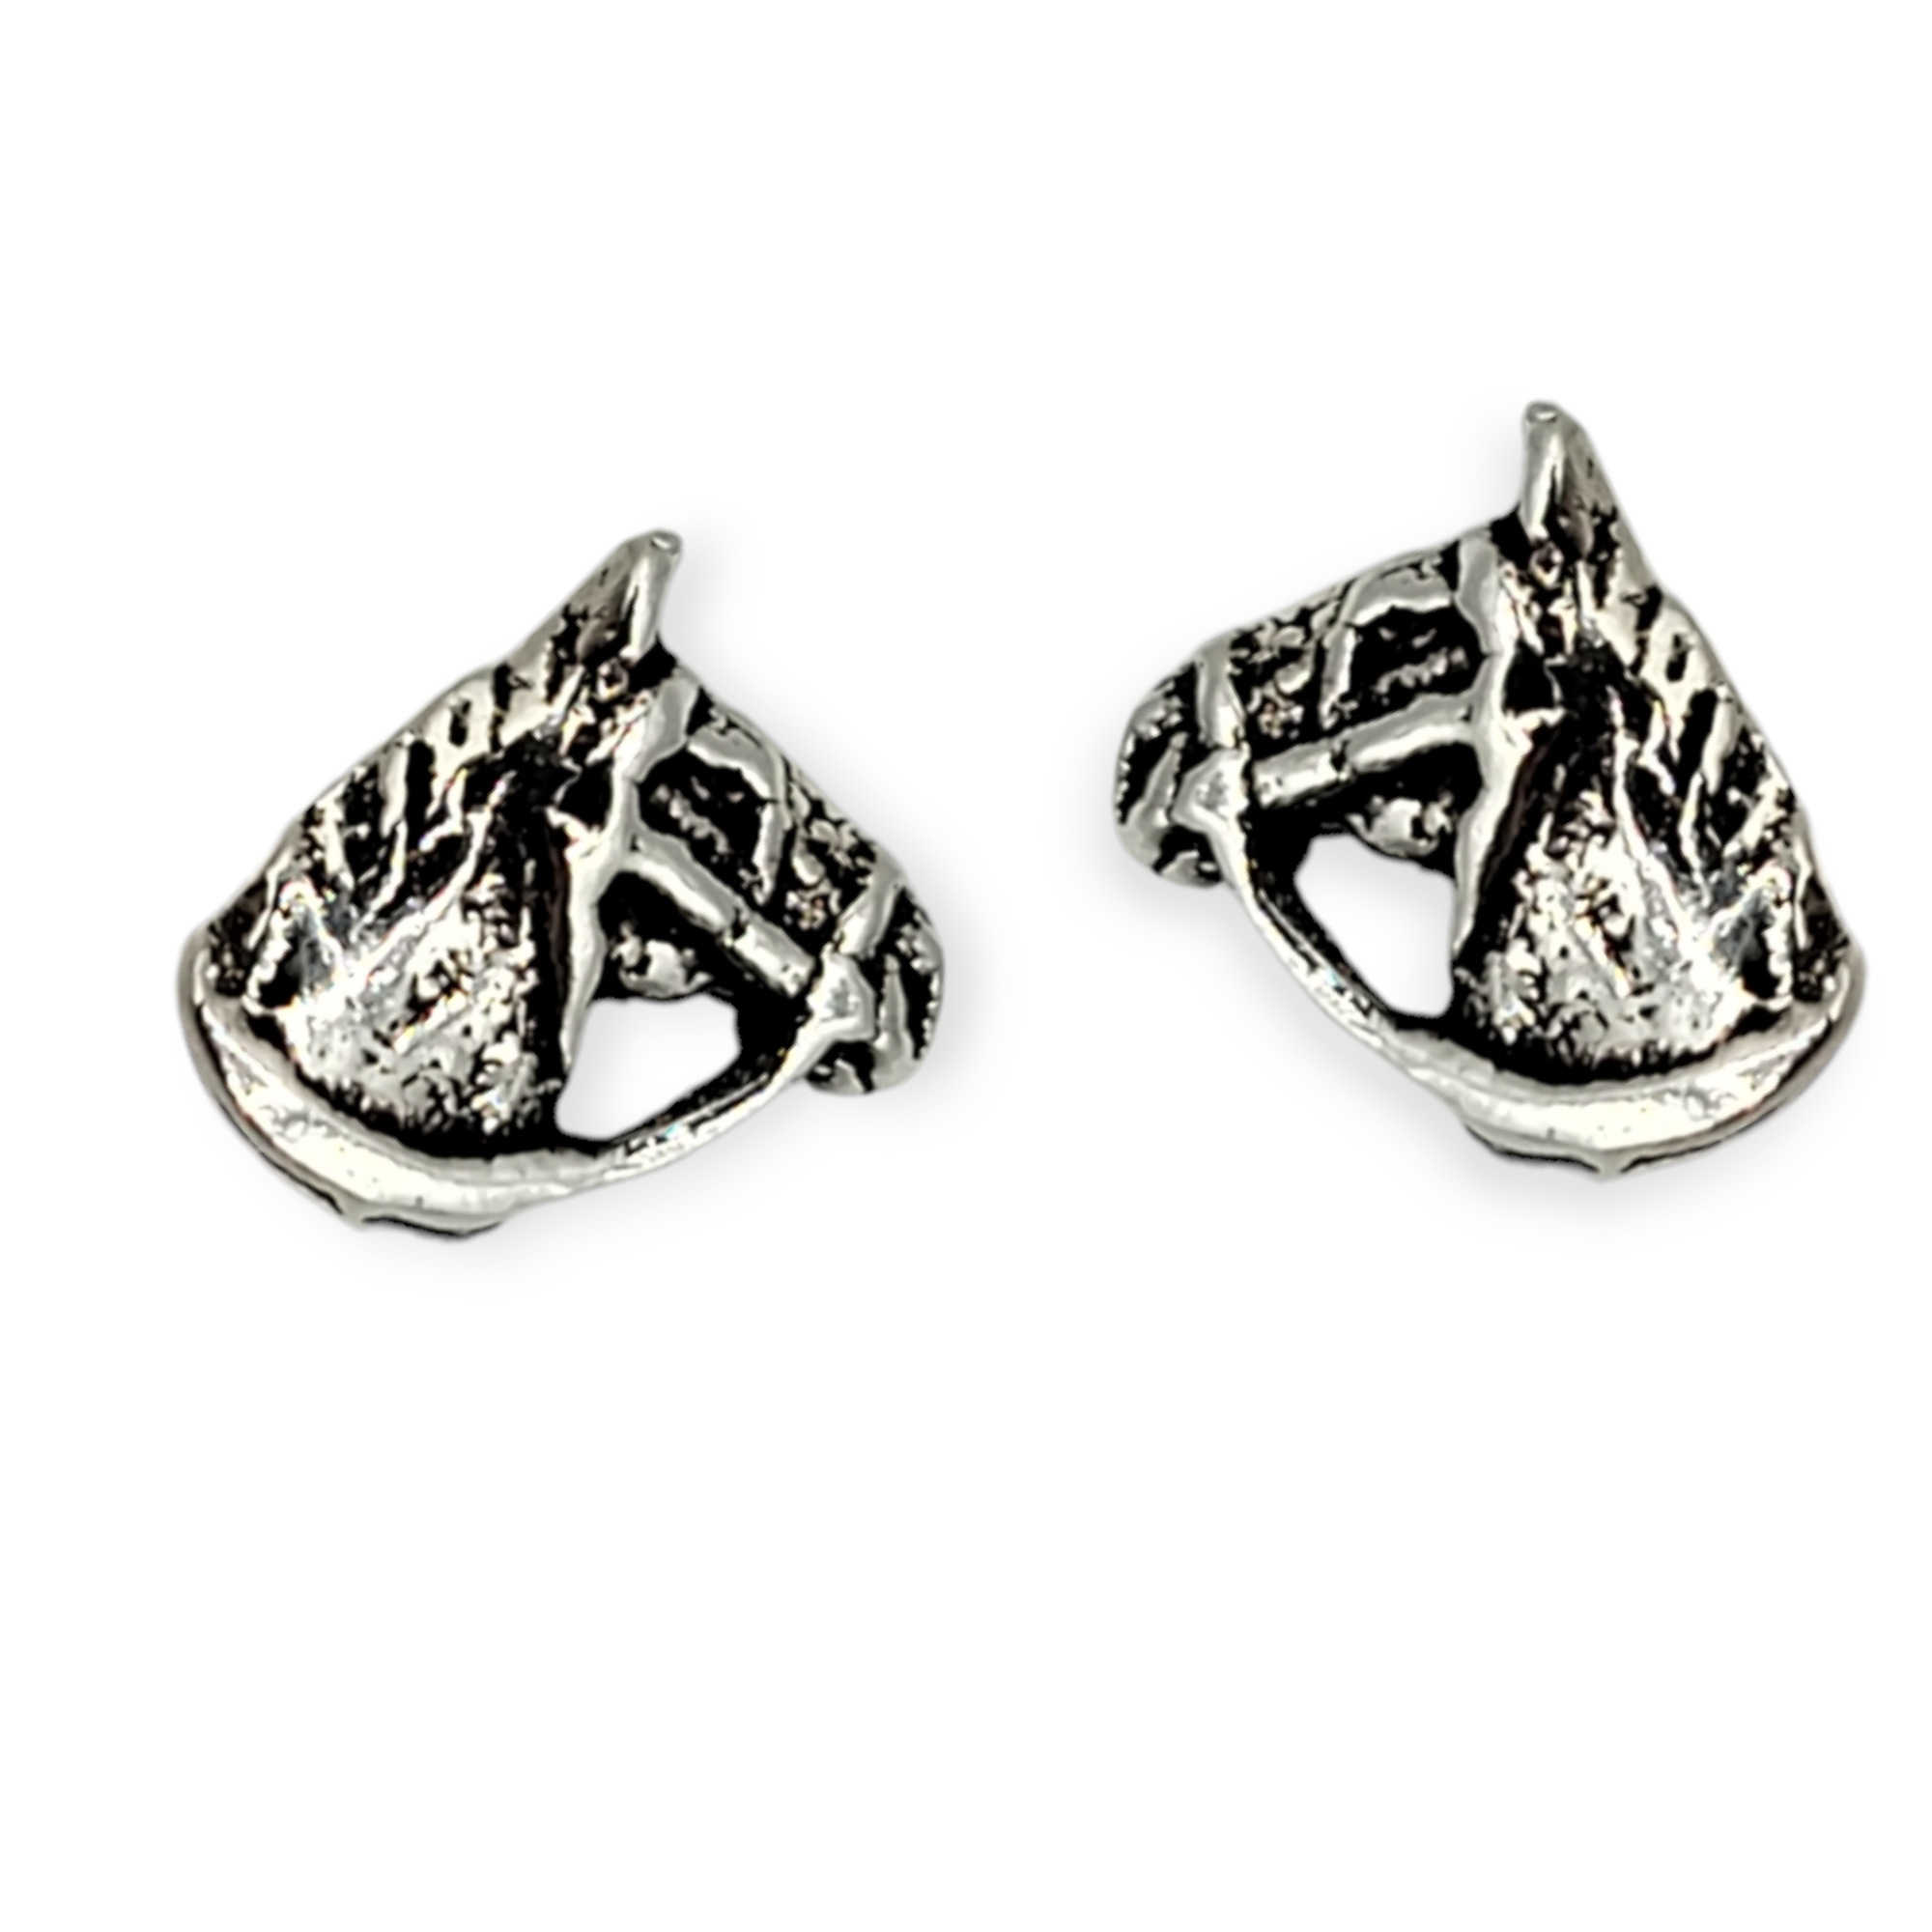 Horse Sterling Silver Stud Earrings - ONLY 1 PAIR LEFT - Travelers Trade Post